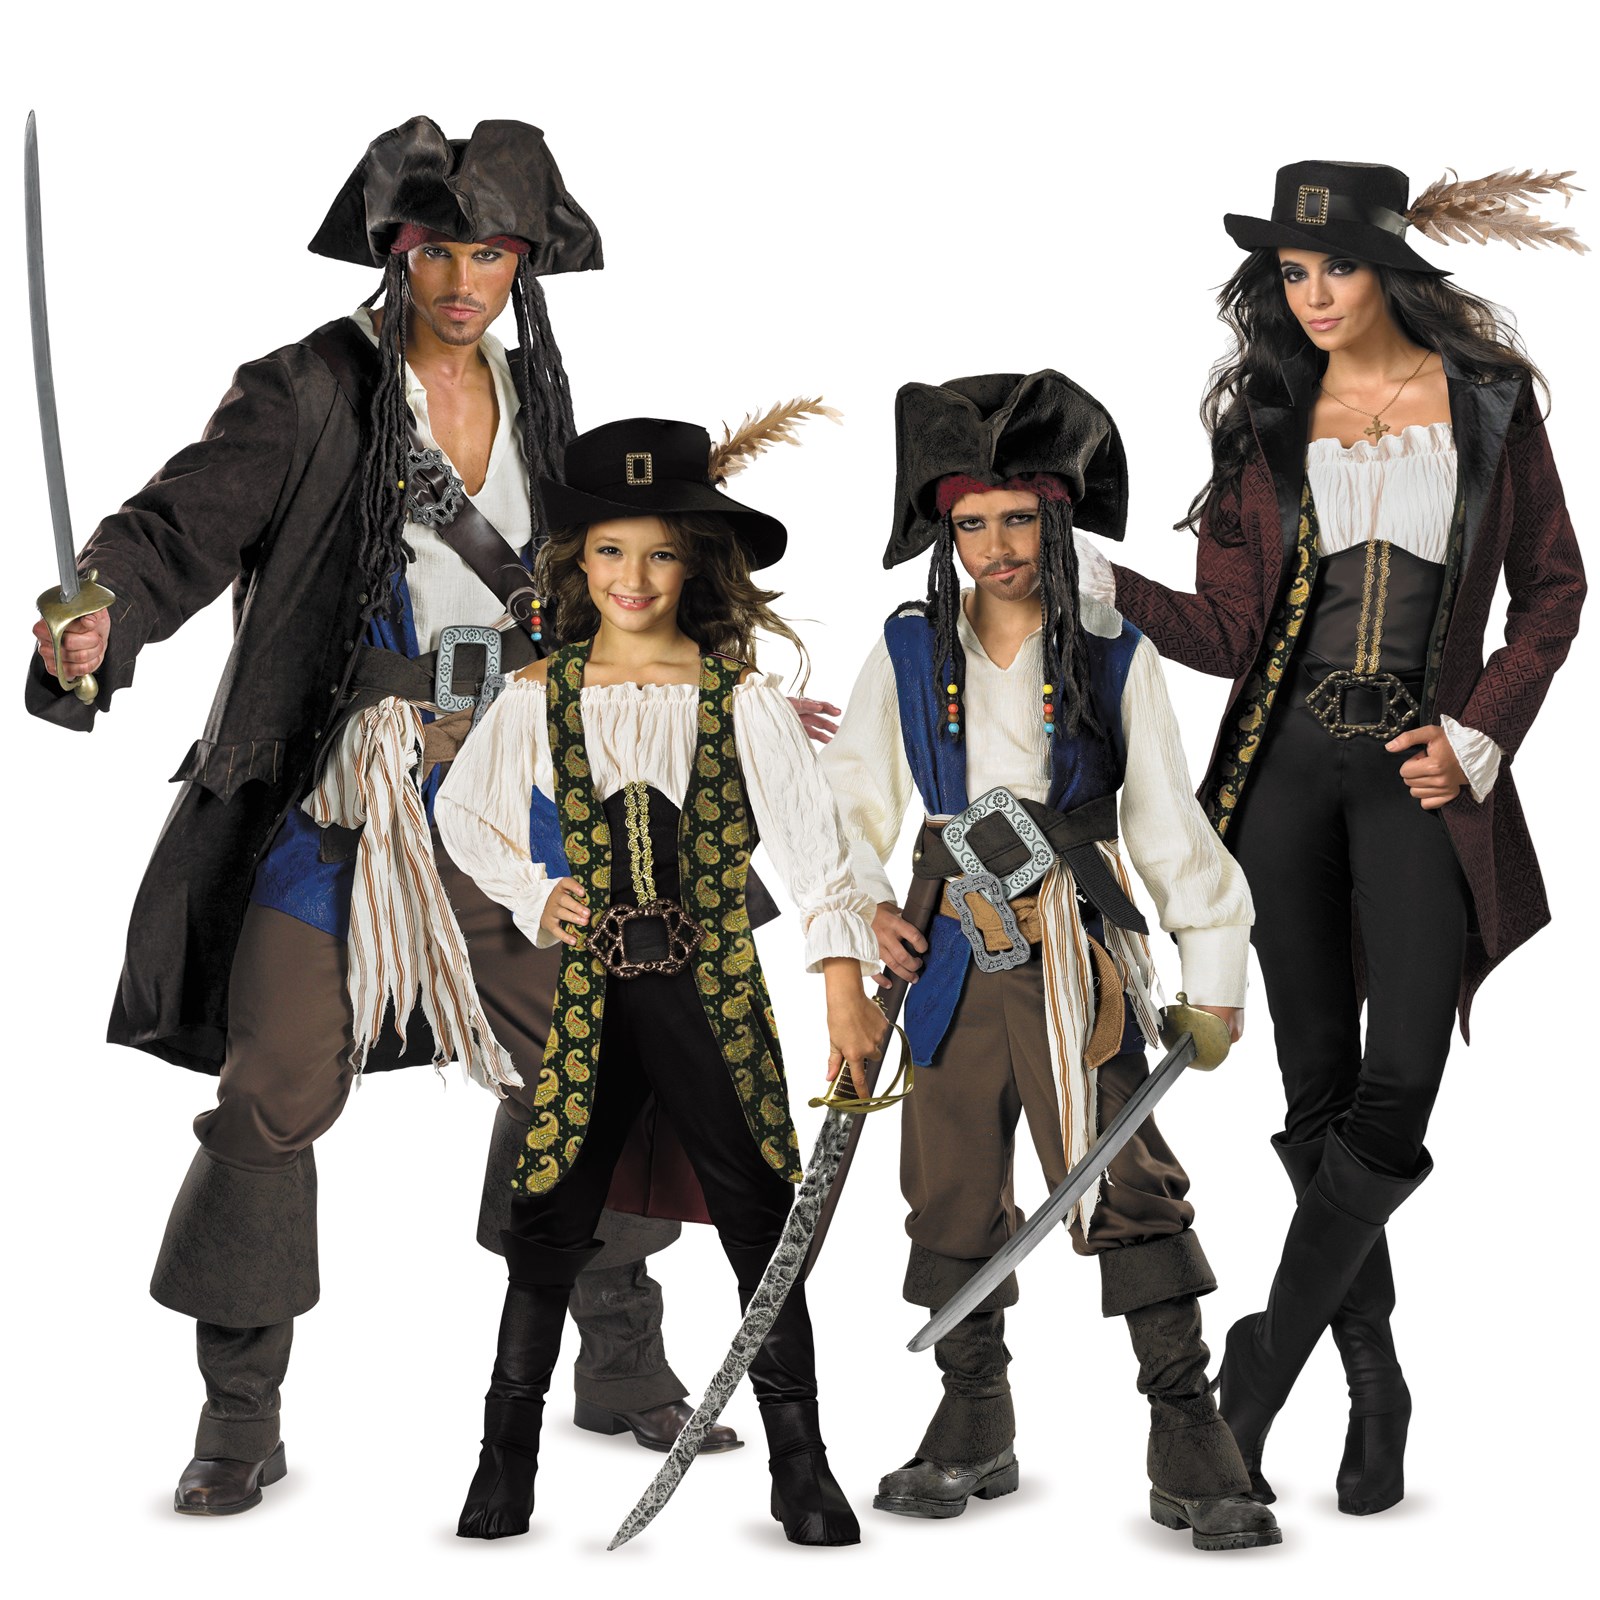 The Pirates of the Caribbean Group Costumes